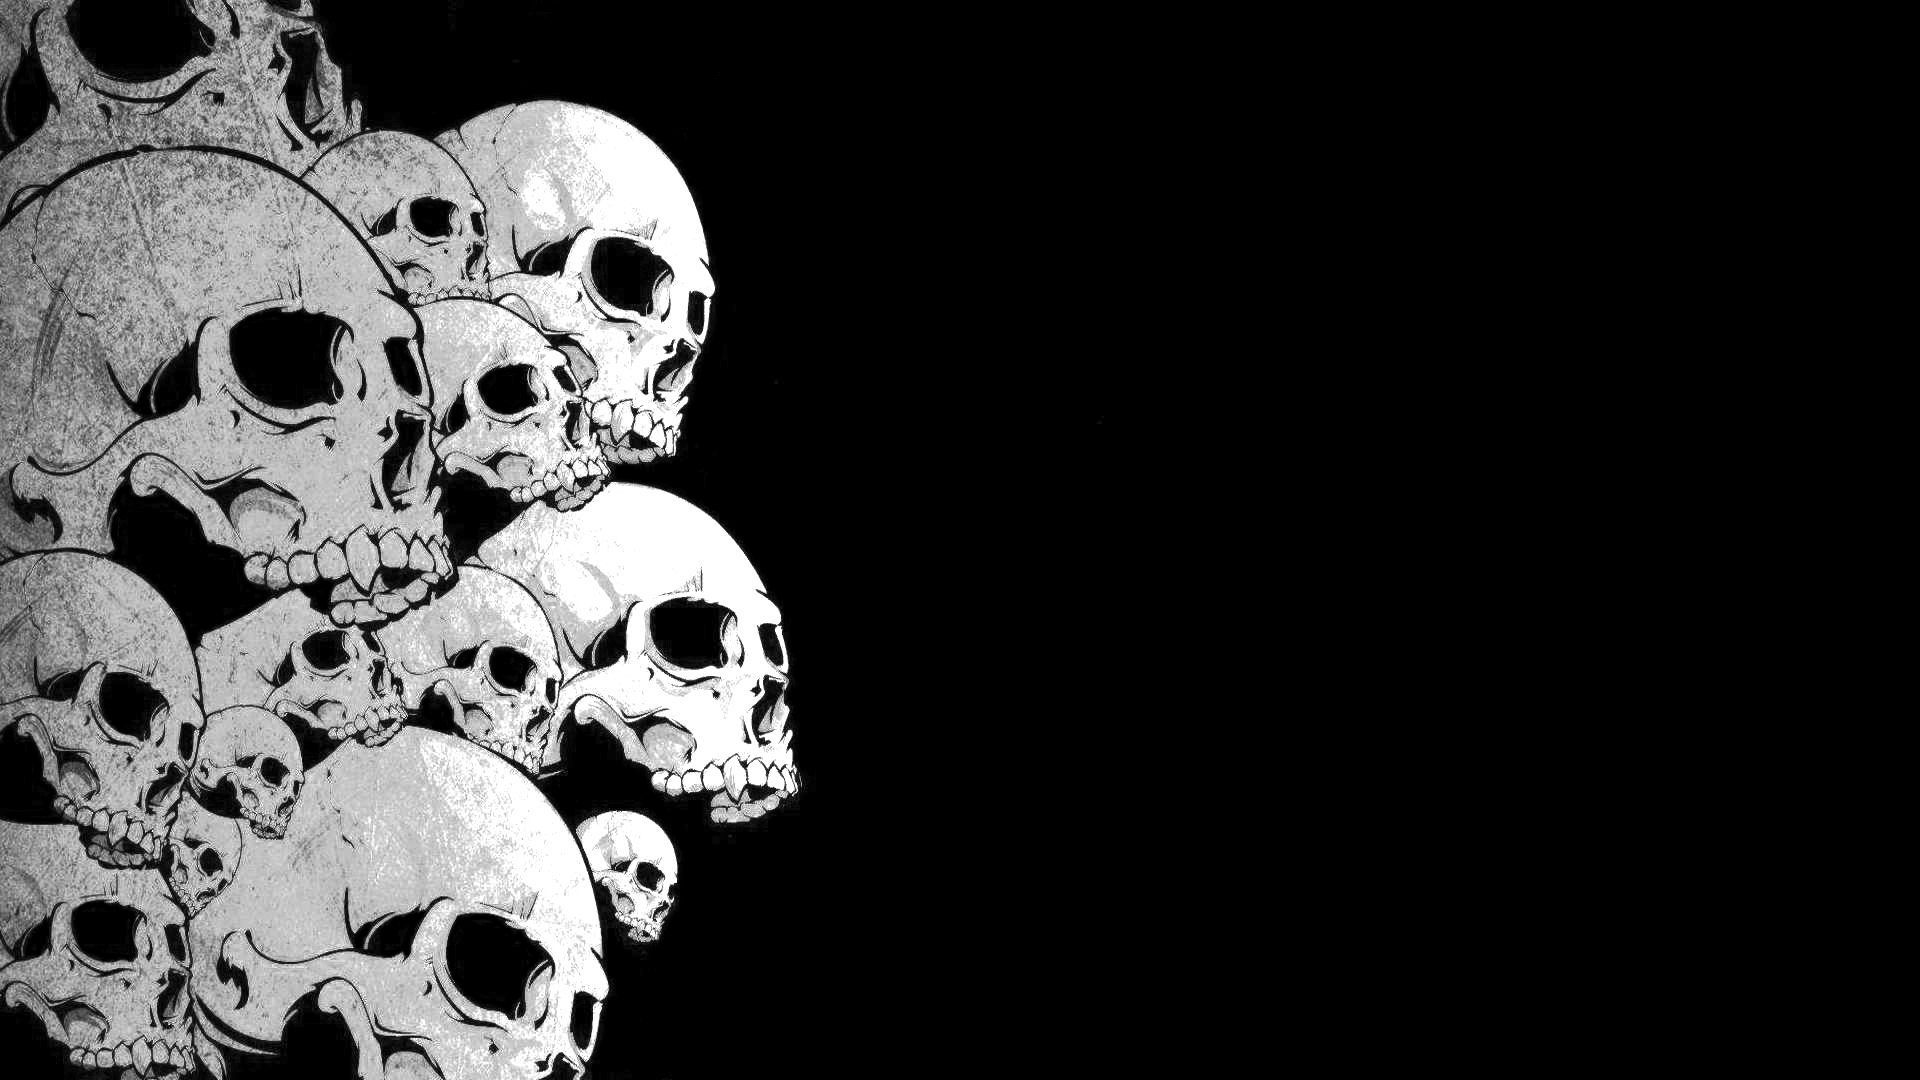 Skull Wallpapers and Backgrounds 14521 - HD Wallpapers Site